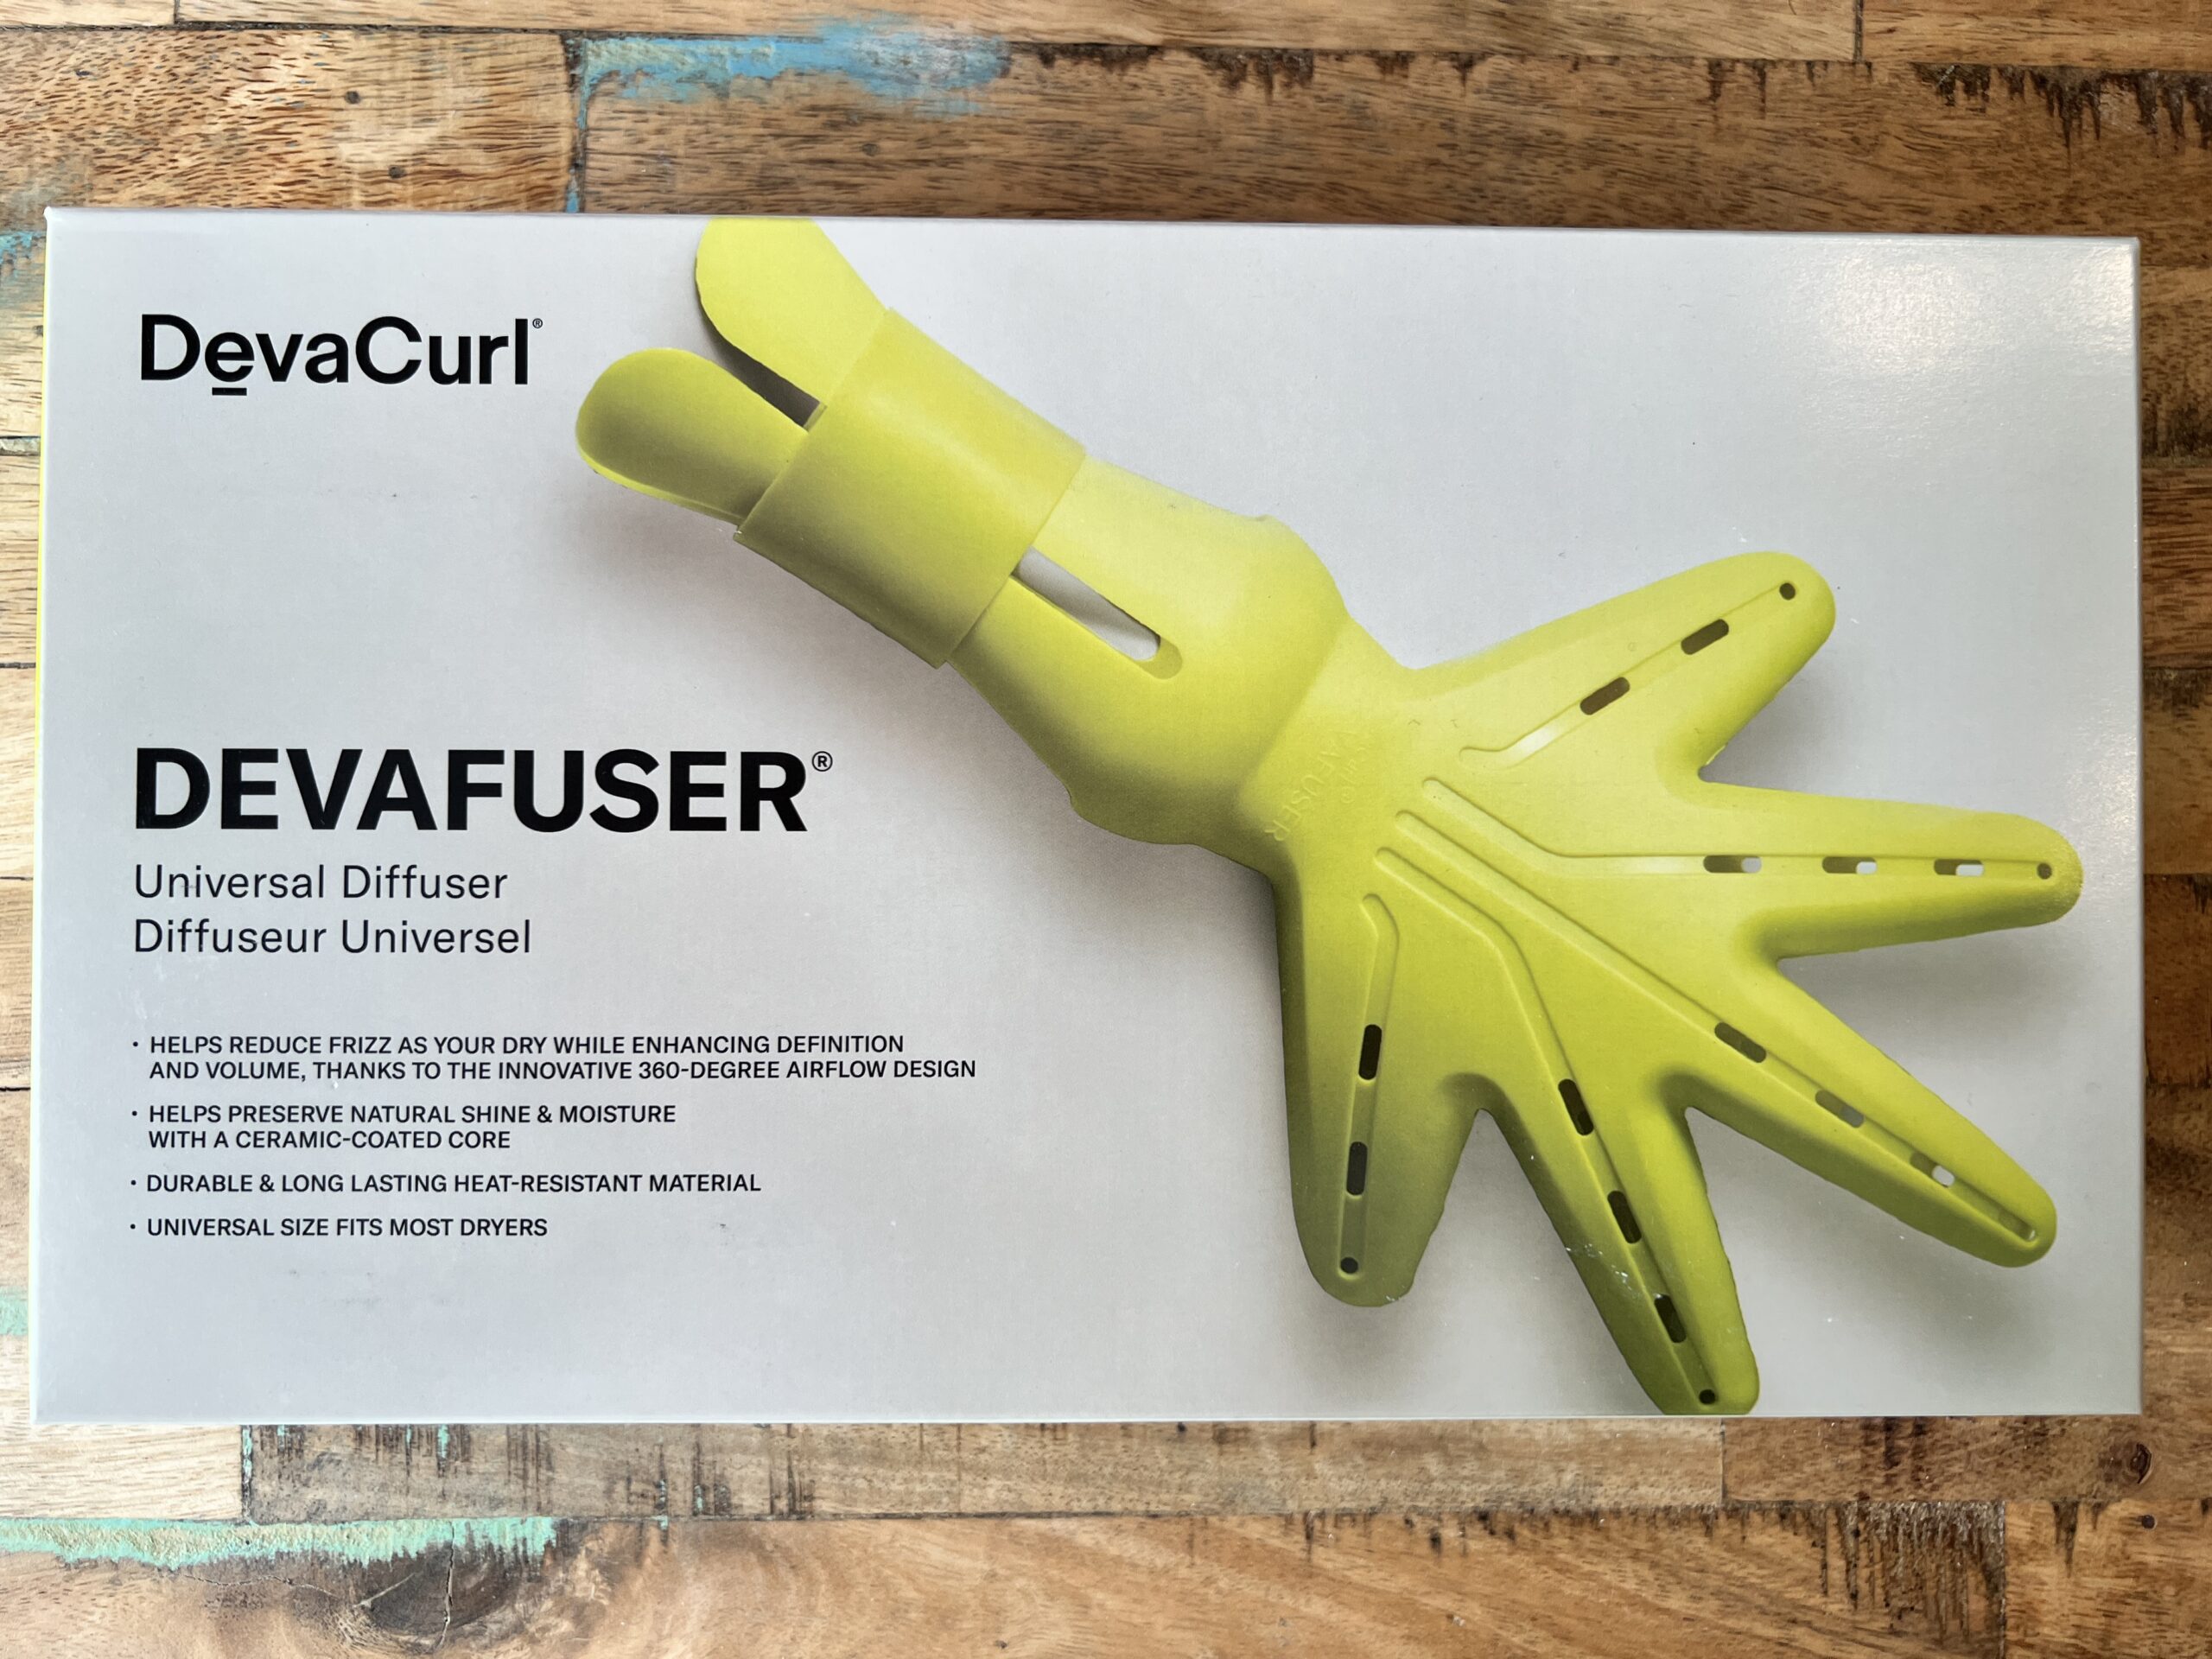 DevaCurl: Devafuser - Universal Diffuser that helps reduce frizz as your hair drys while enhancing curl definition and volume due to its innovative 360-degree airflow design.